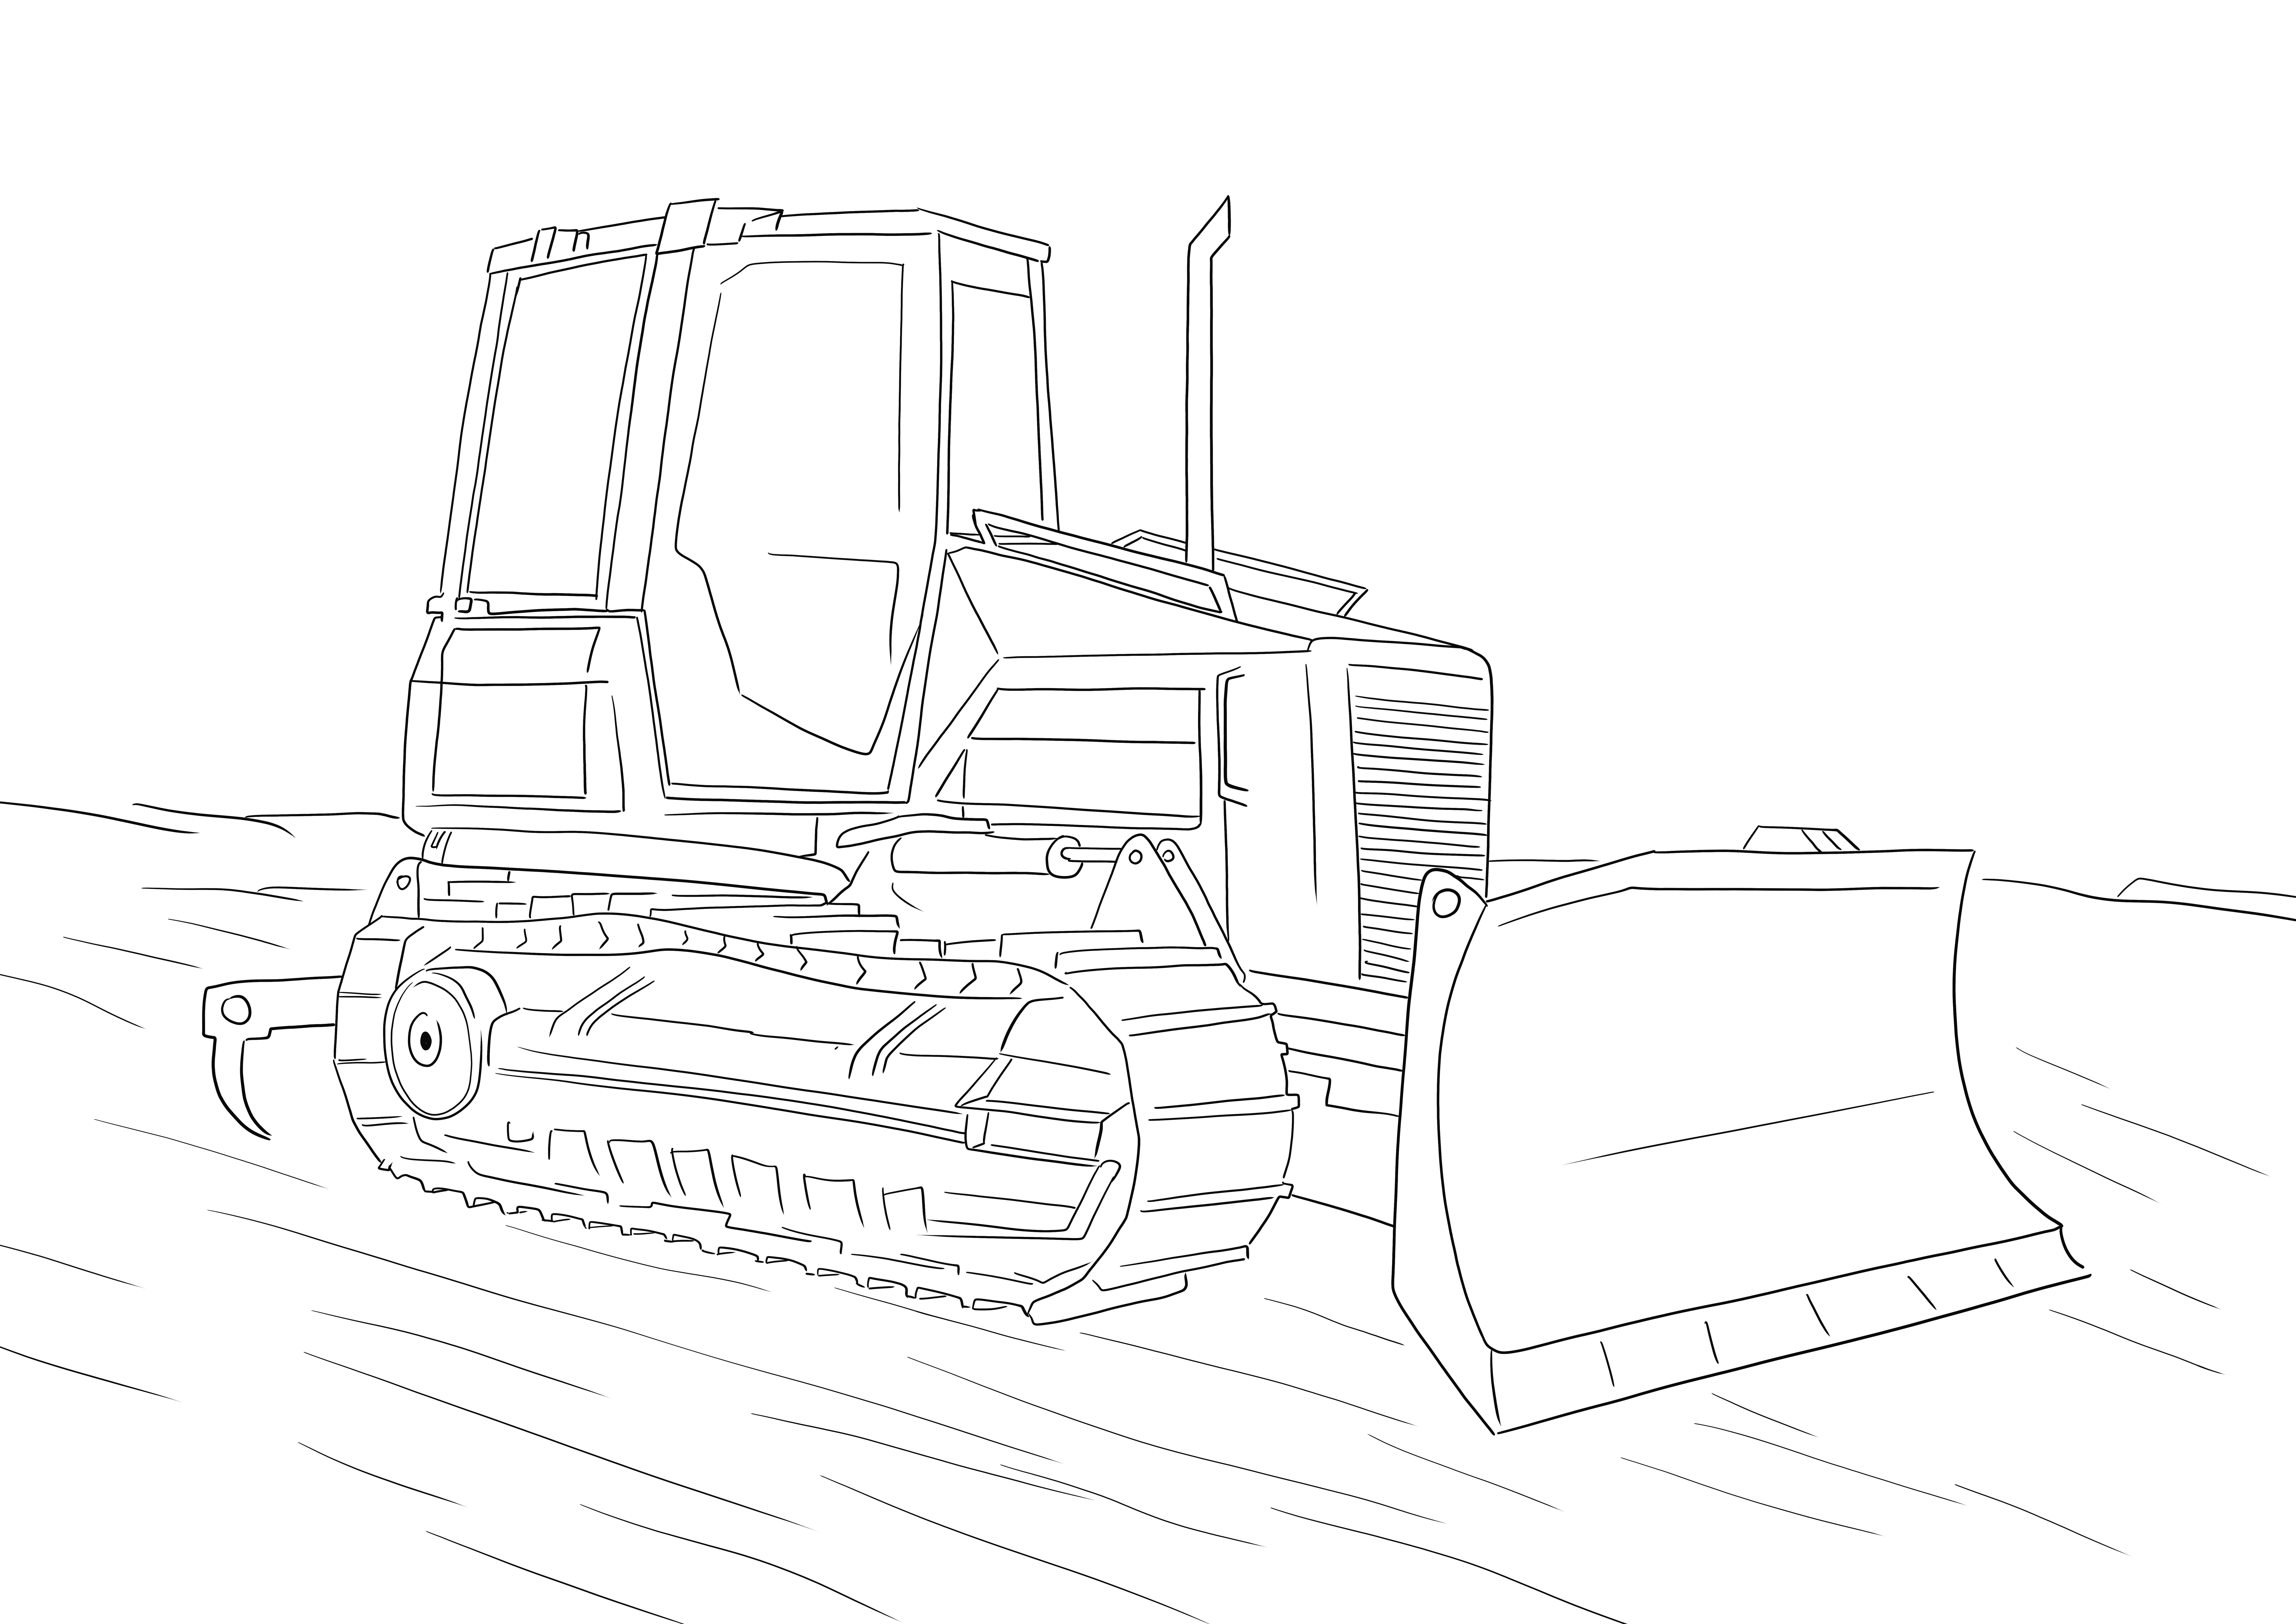 Caterpillar Bulldozer is ready to be printed and colored for free